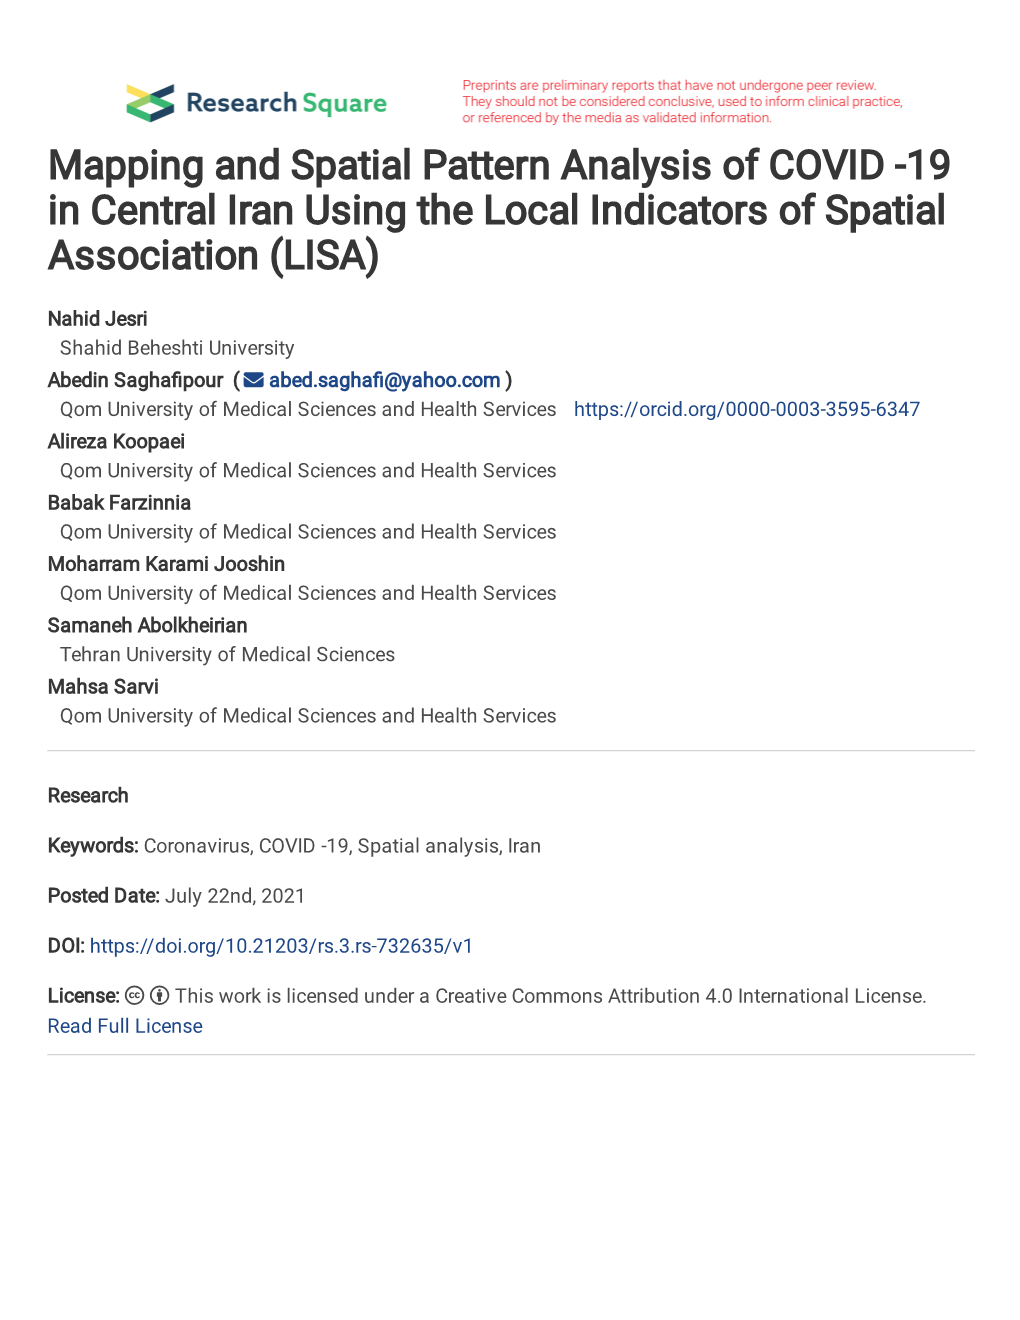 Mapping and Spatial Pattern Analysis of COVID -19 in Central Iran Using the Local Indicators of Spatial Association (LISA)